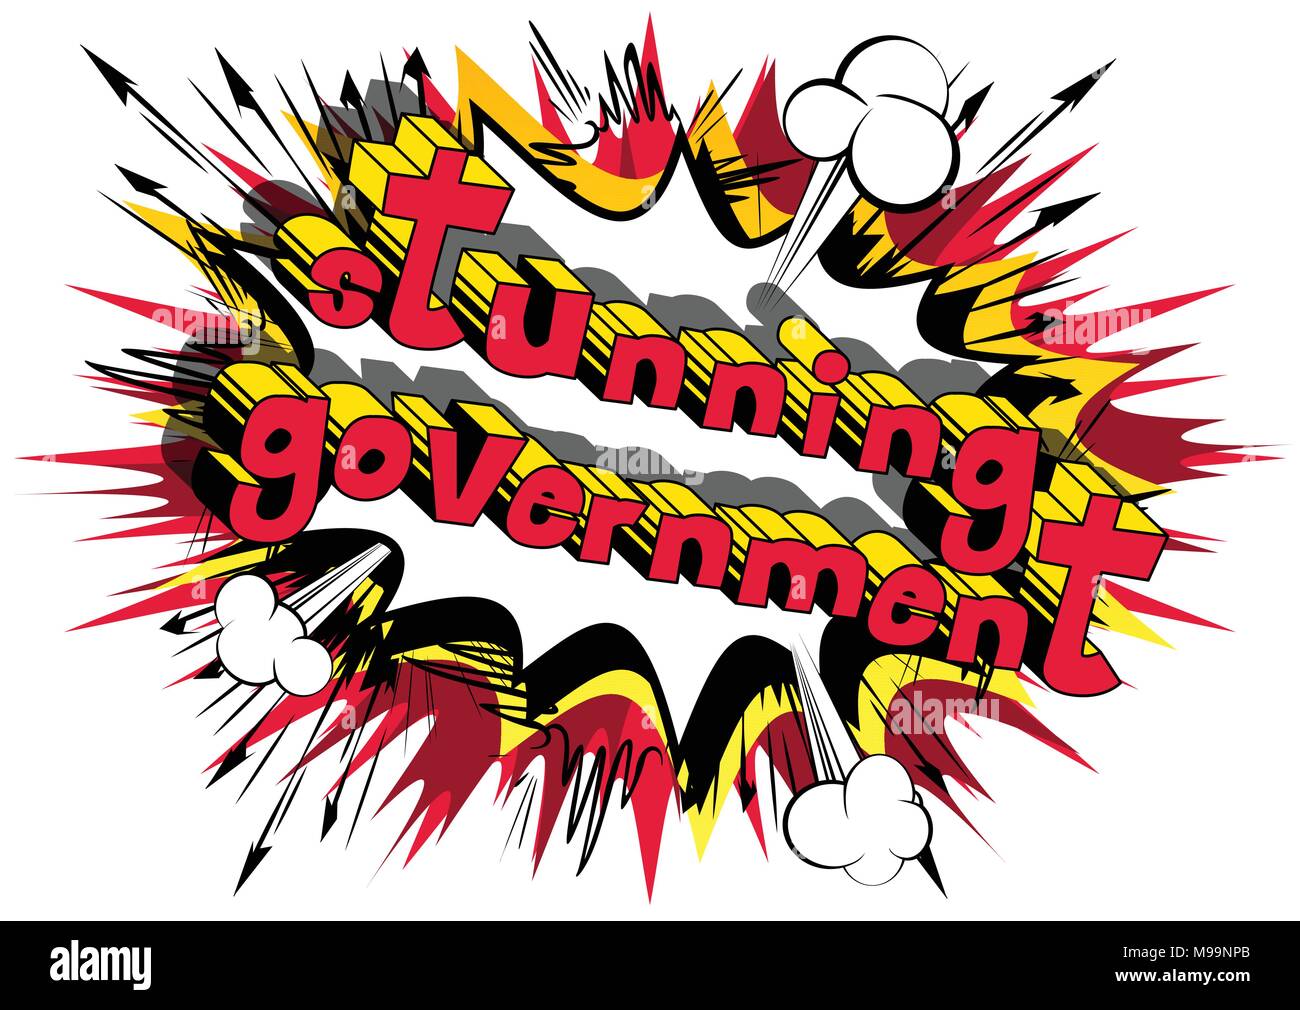 Stunning Government - Comic book style phrase on abstract background. Stock Vector